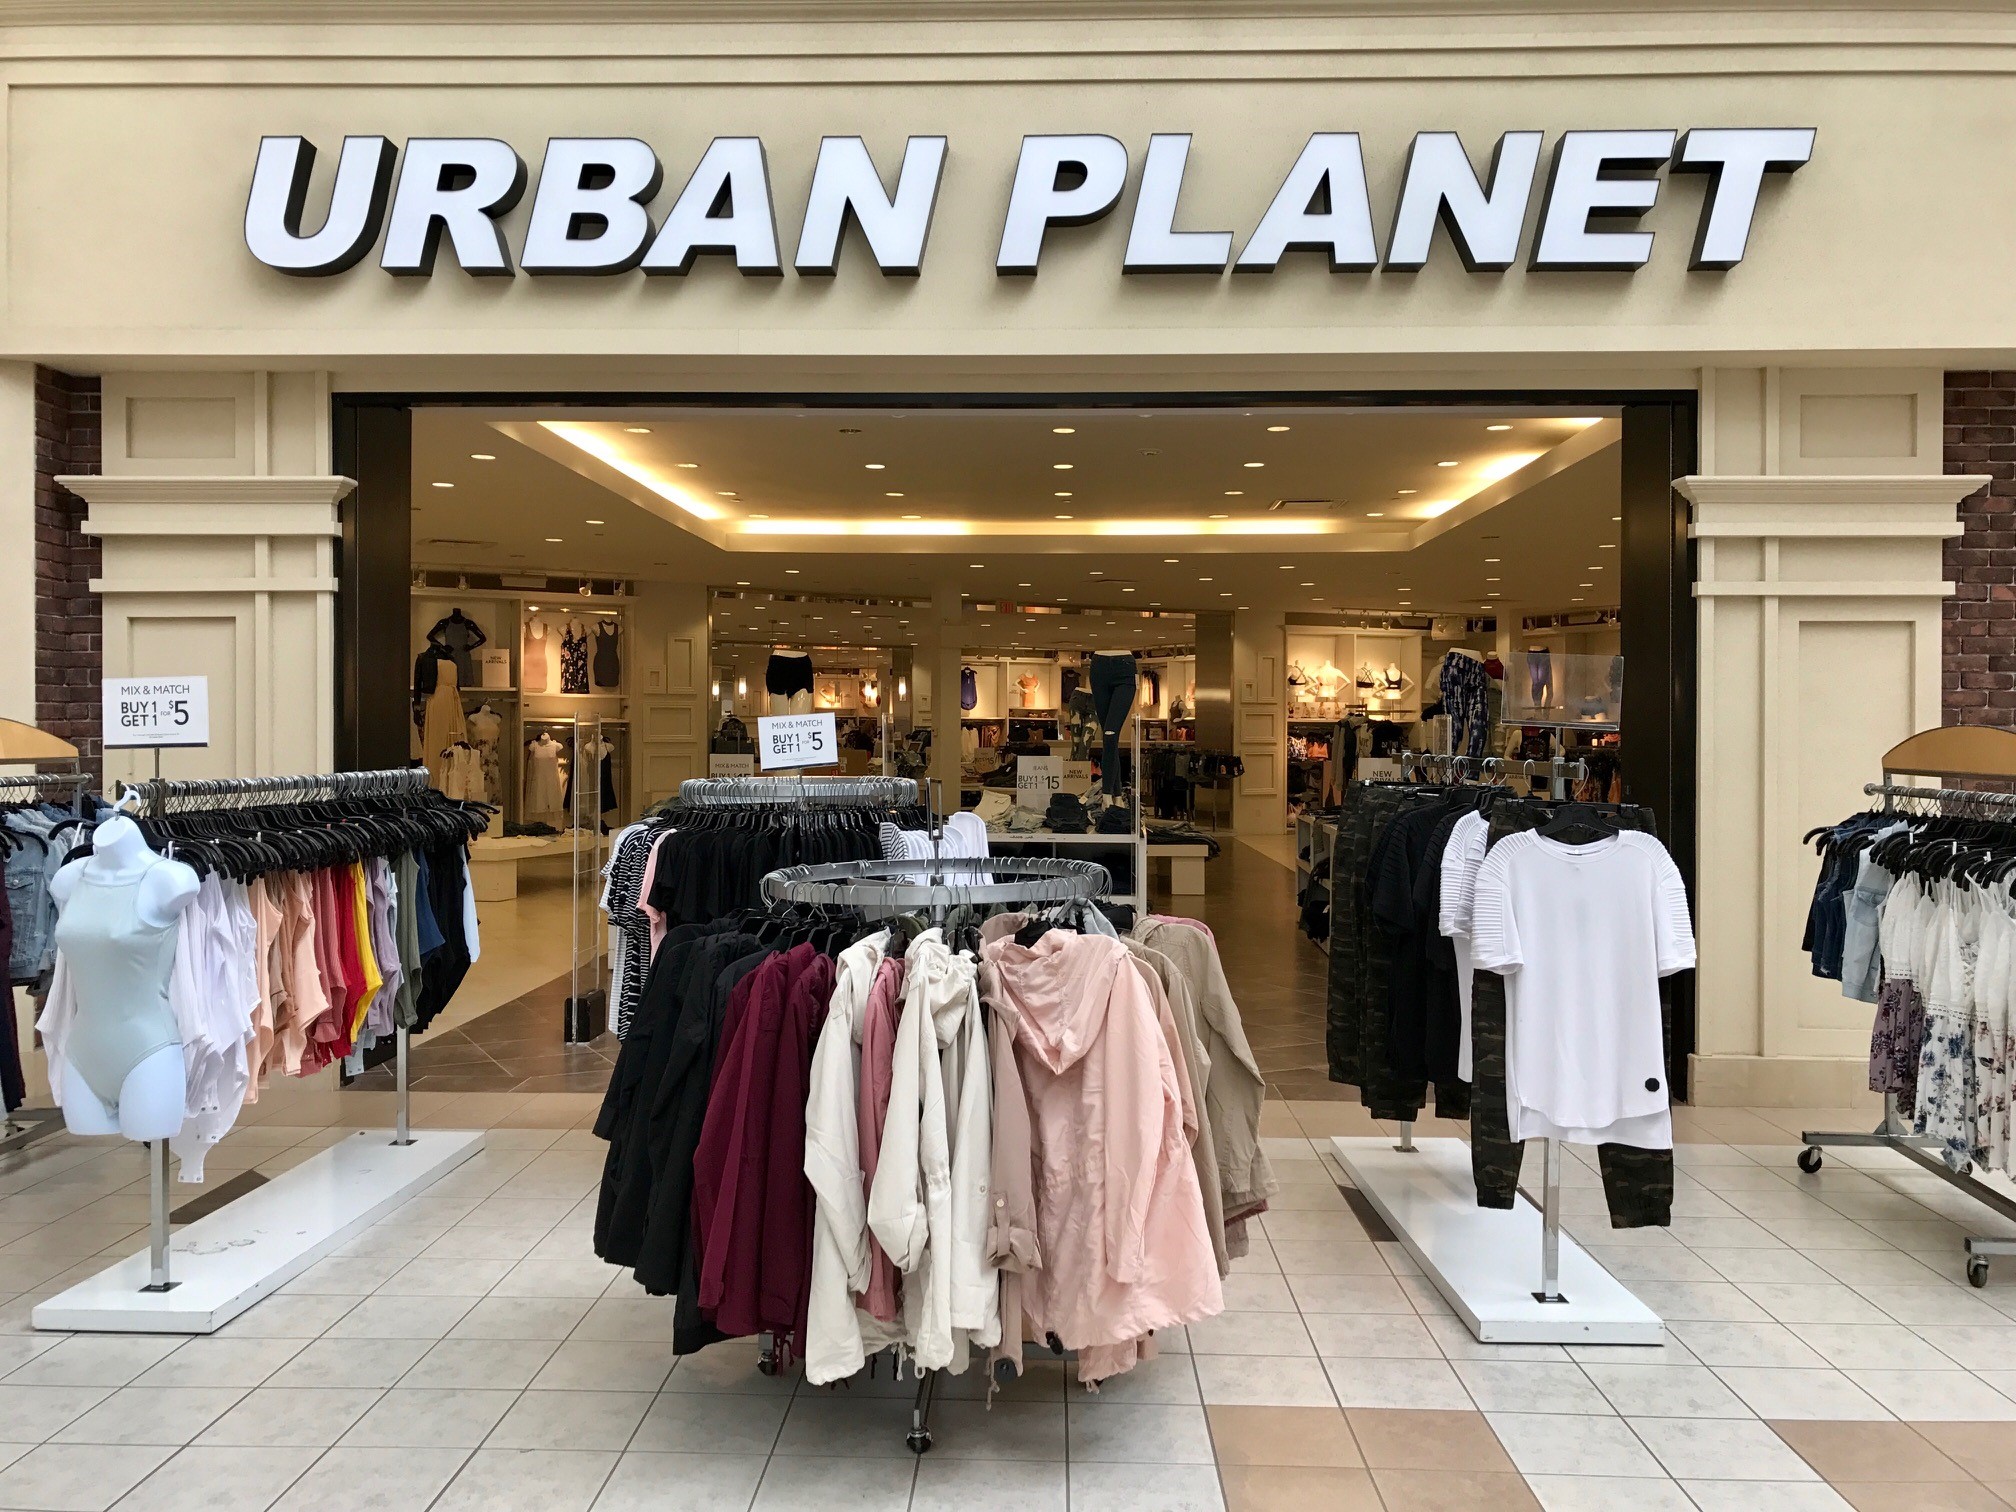 URBAN PLANET: Shop Urban Planet for the latest in womens, mens, girls and boys fashions at affordable prices!